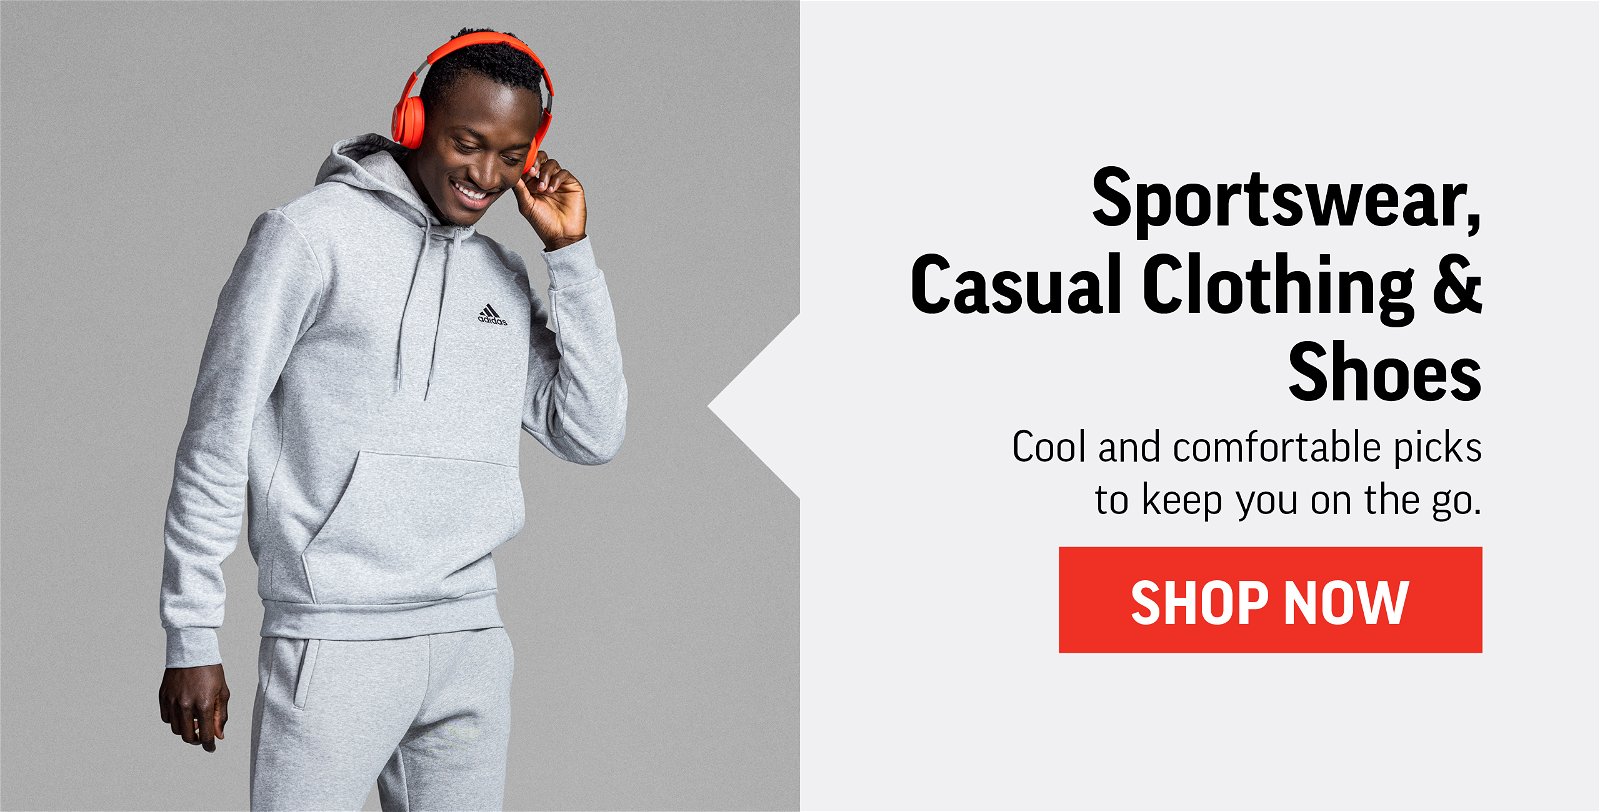 SPORTSWEAR, CASUAL CLOTHING & SHOES